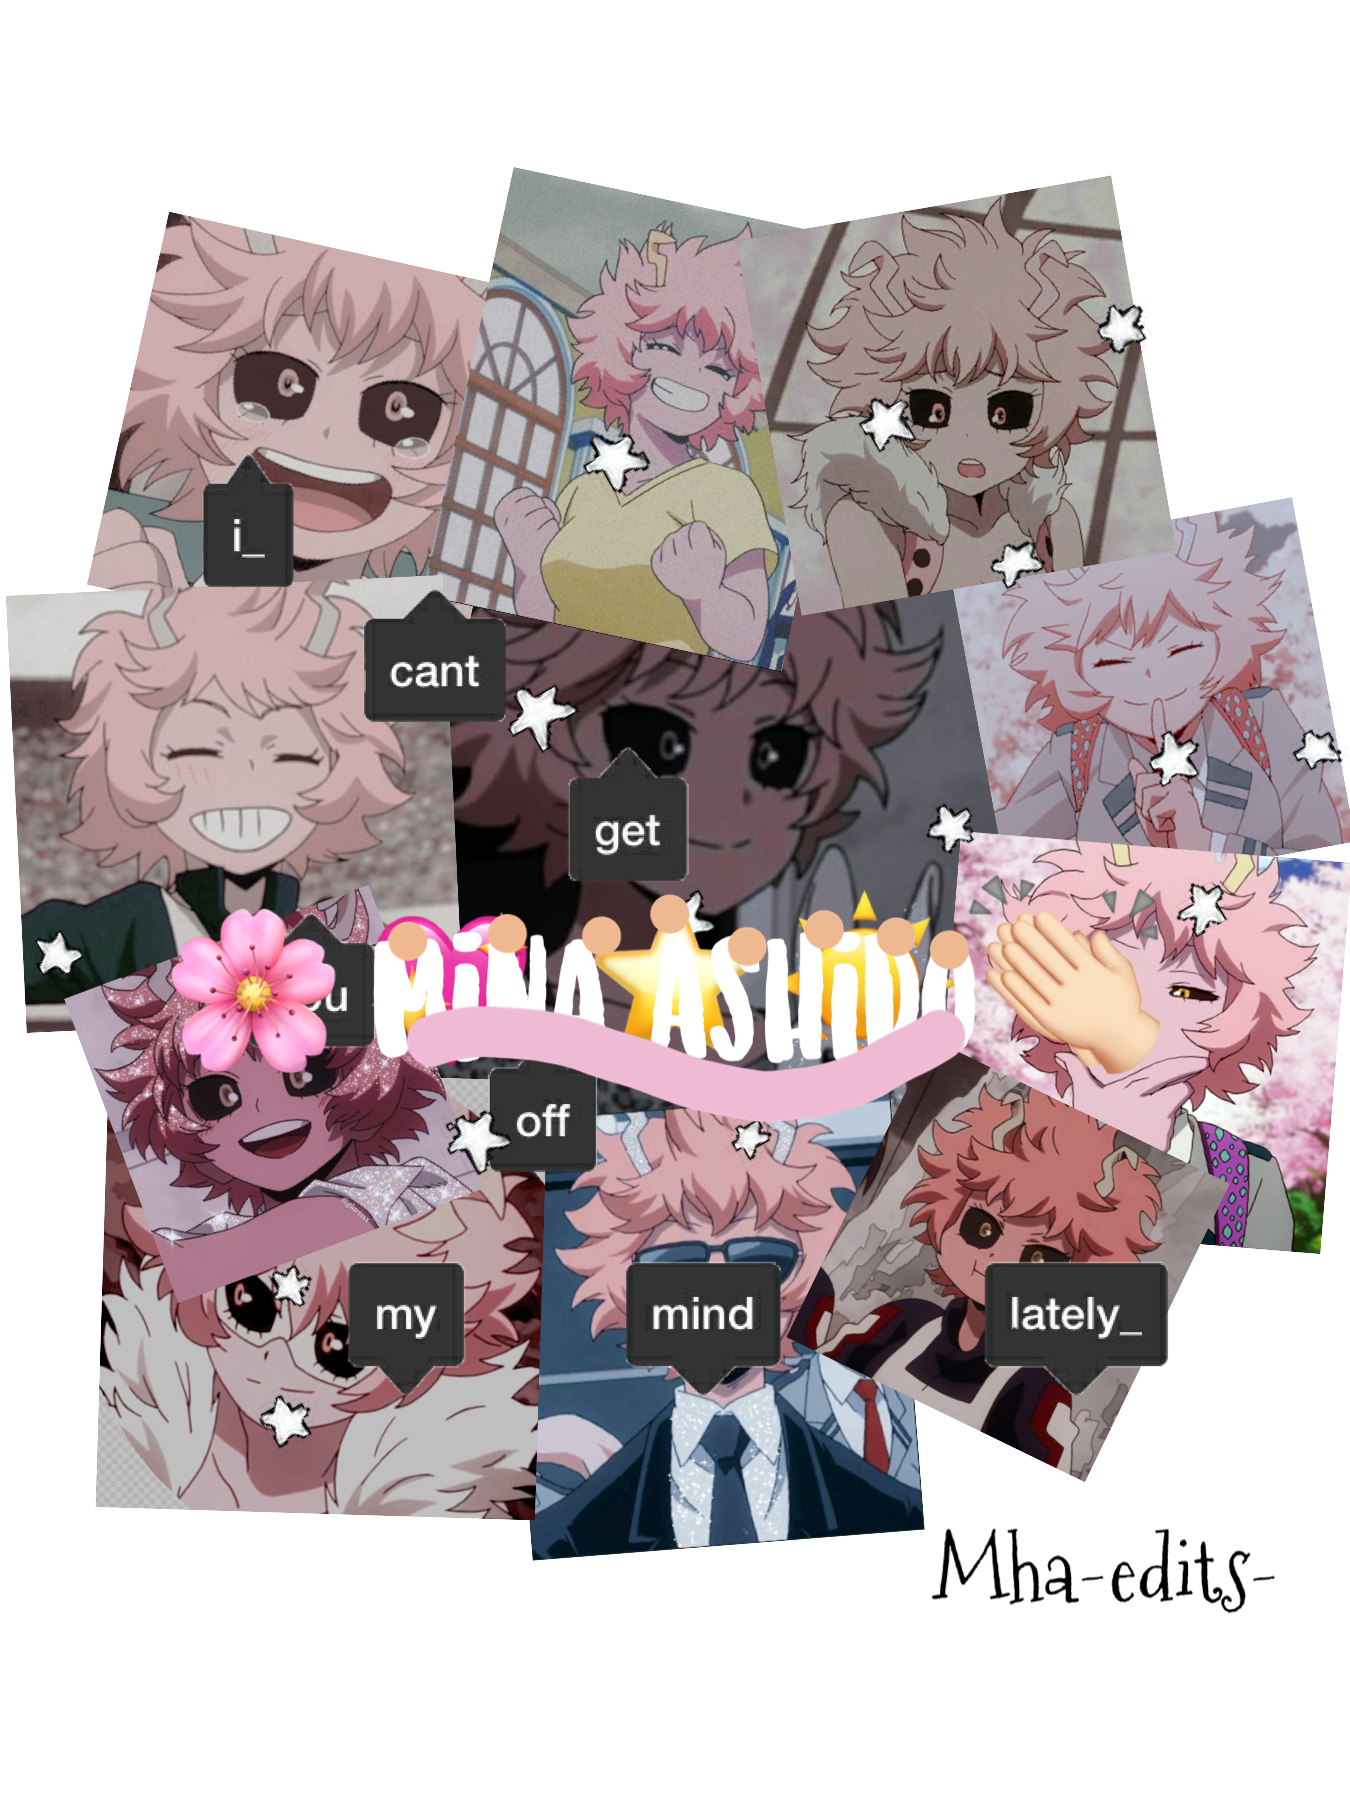 (⭐️tap👏🏻)

Mina ashido☀️🙃💗
She’s so bubbly and that’s what I love about her😙